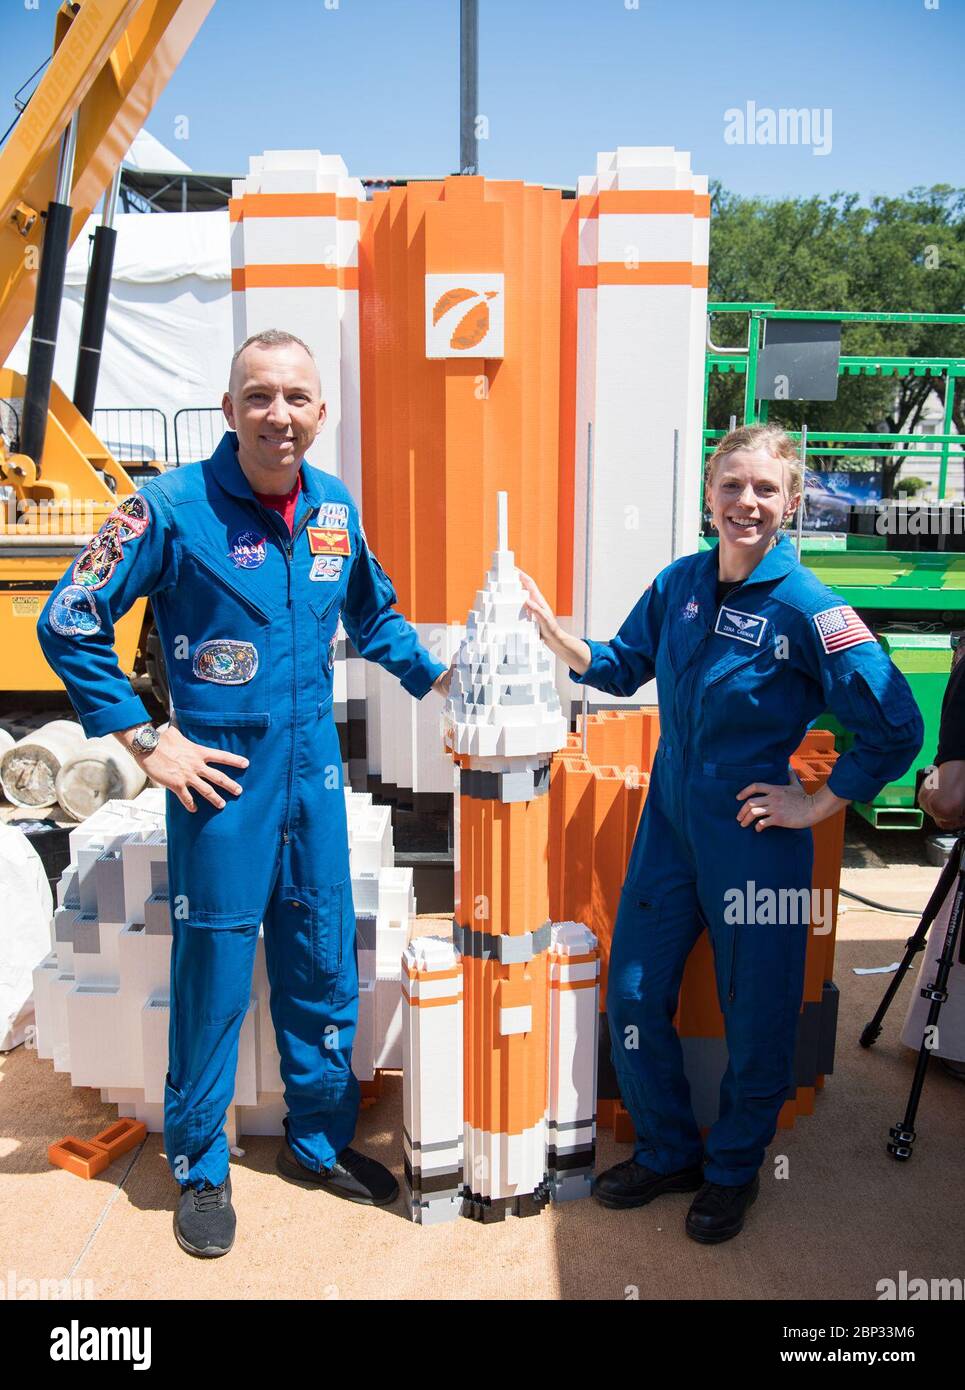 Apollo 11 50th Anniversary Celebration  NASA astronaut Randy Bresnik, left, and NASA astronaut candidate, Zena Cardman, pose for a photo with the soon to be 20 ft. model of the Space Launch System (SLS) made out of LEGOs, at the Apollo 11 50th Anniversary celebration on the National Mall, Friday, July 19, 2019 in Washington. Apollo 11 was the first mission to land astronauts on the Moon and launched on July 16, 1969 with astronauts Neil Armstrong, Michael Collins, and Buzz Aldrin. Stock Photo